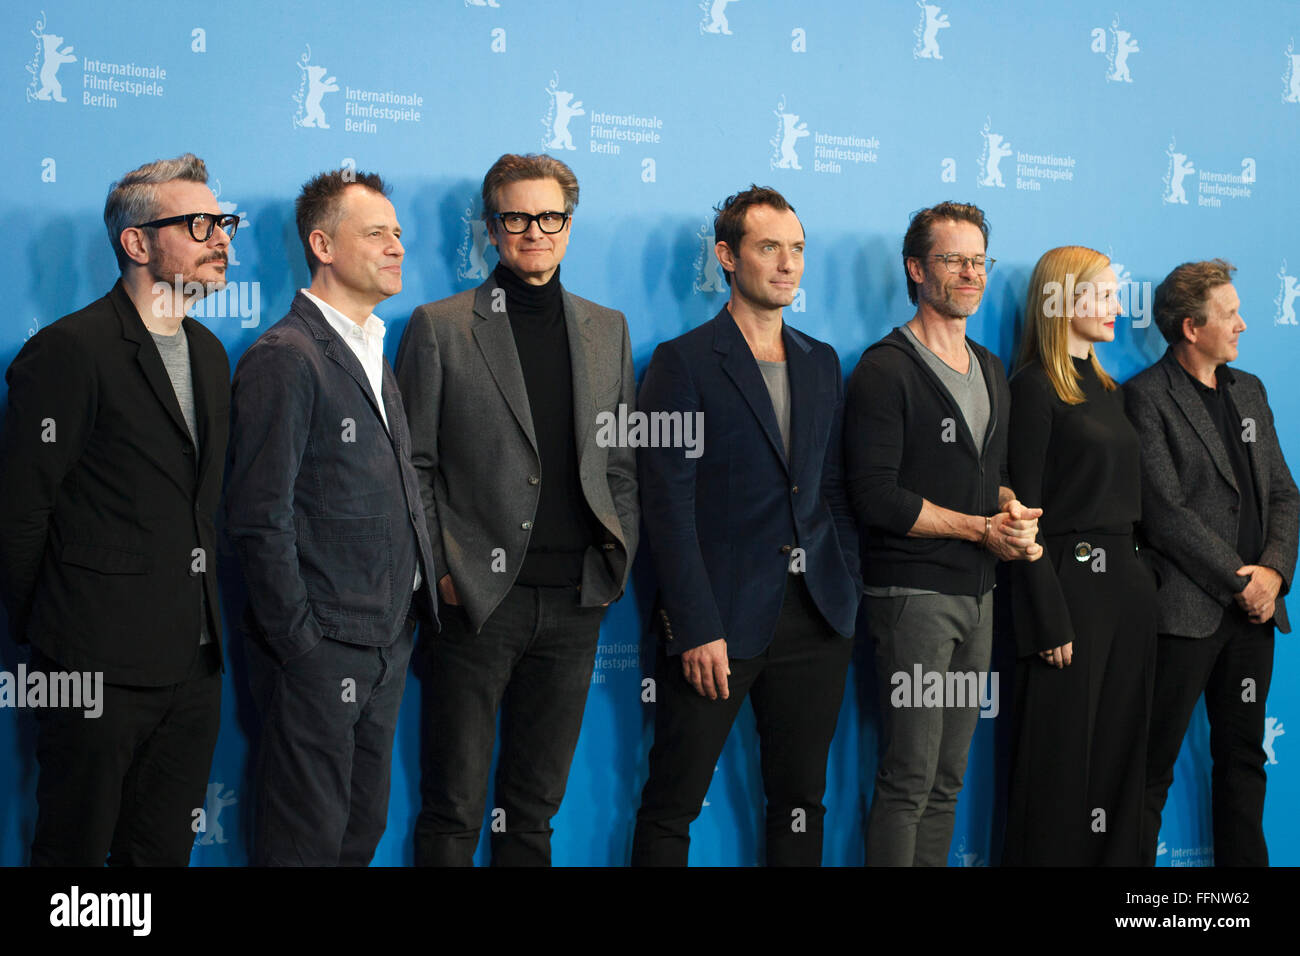 Berlin, Germany. 16th February, 2016. Director Michael Grandage, actors Colin Firth, Jude Law, Guy Pearce, Laura Linney, writer A. Scott Berg, screenplay John Loganand at  the 'Genius' photo call during the 66th Berlinale International Film Festival Berlin Credit:  Odeta Catana/Alamy Live News Stock Photo